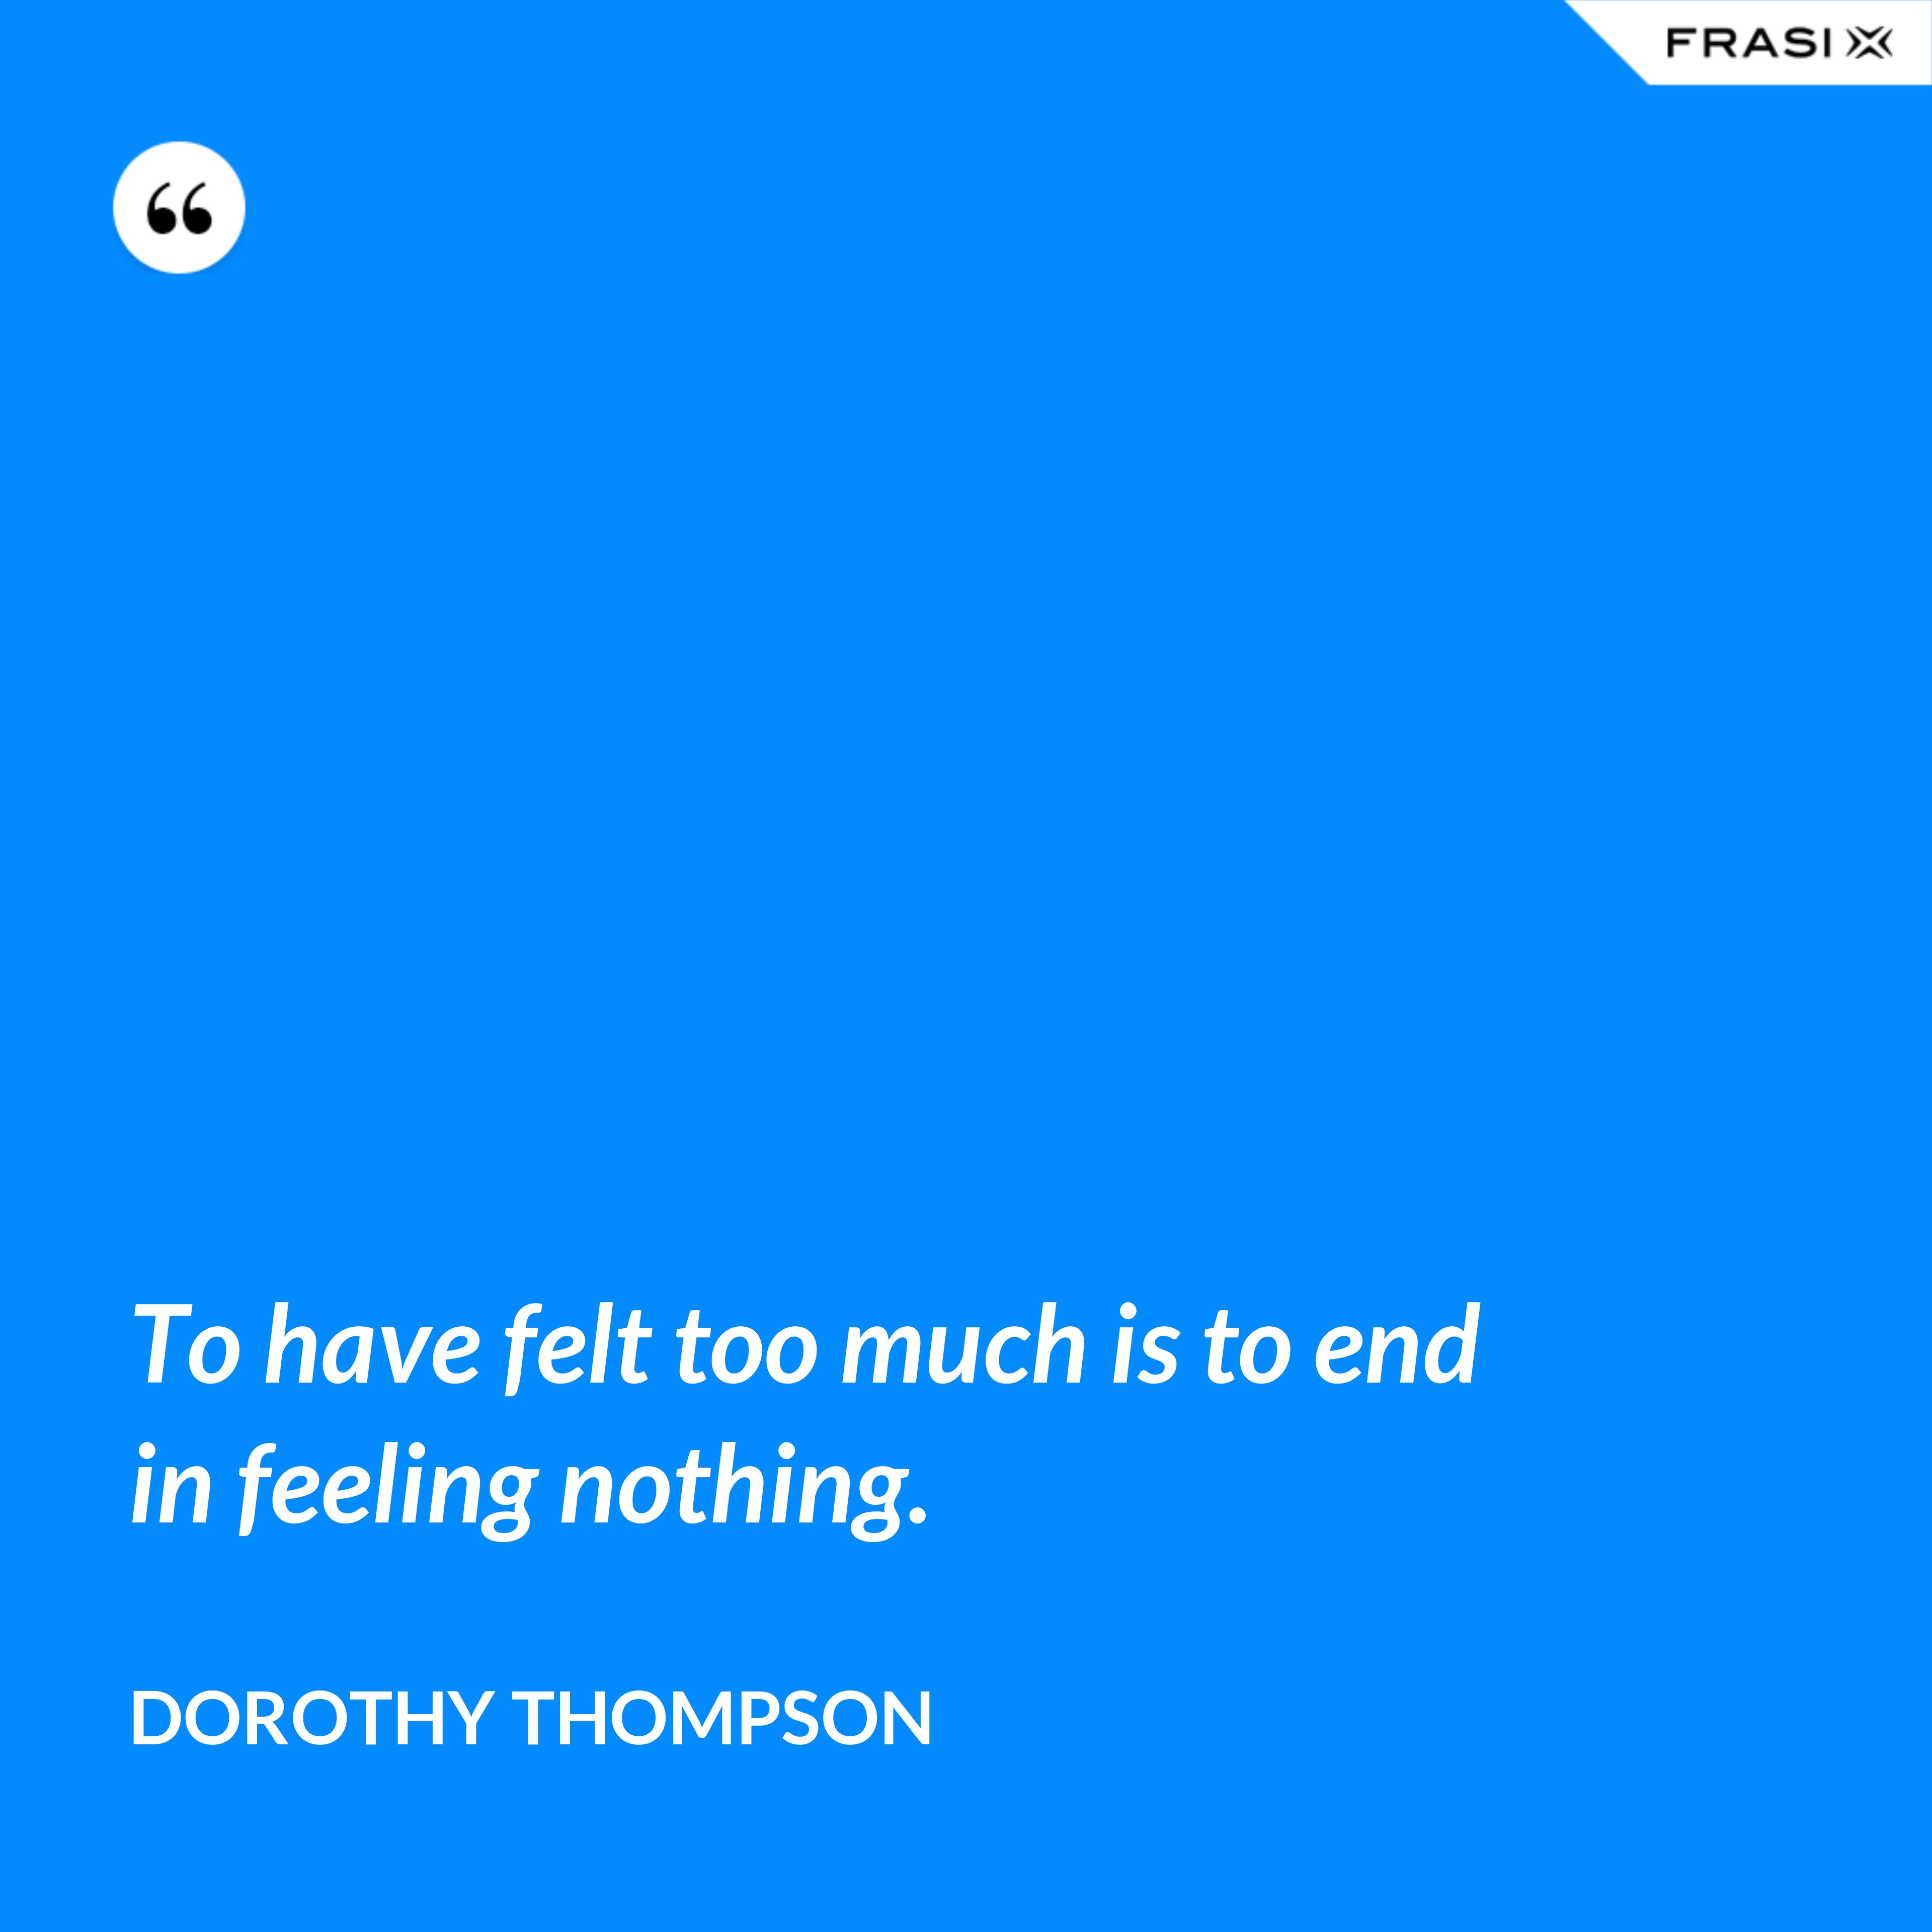 To have felt too much is to end in feeling nothing. - Dorothy Thompson